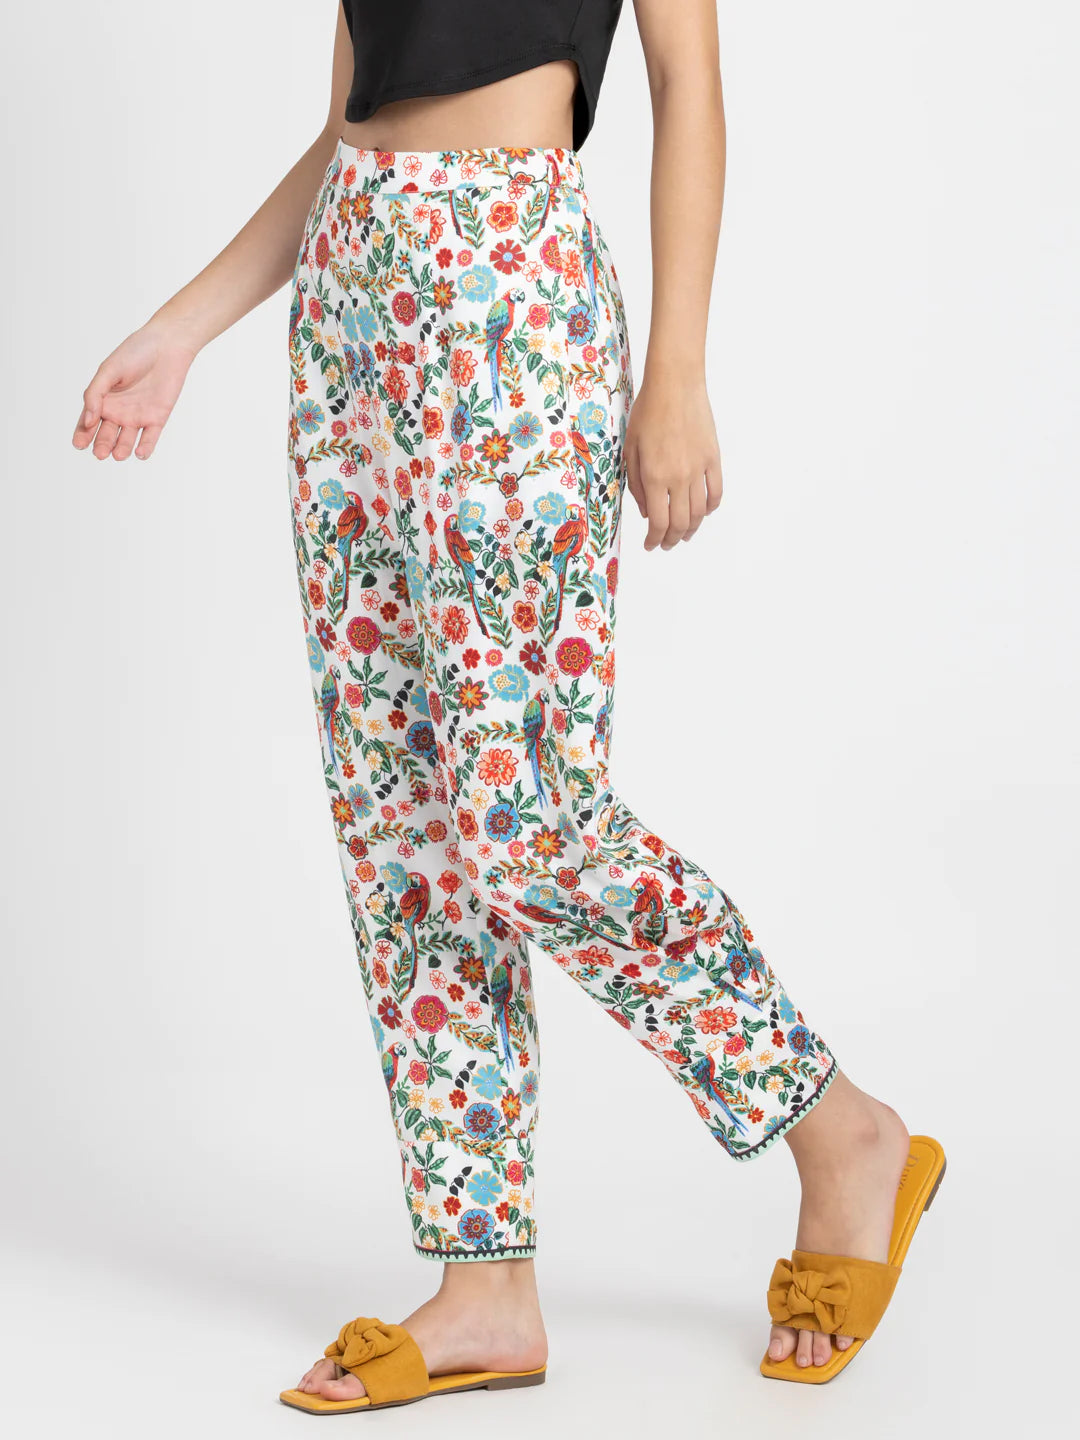 Floral Pary Pant for Women | Floral Radiance Party Pant